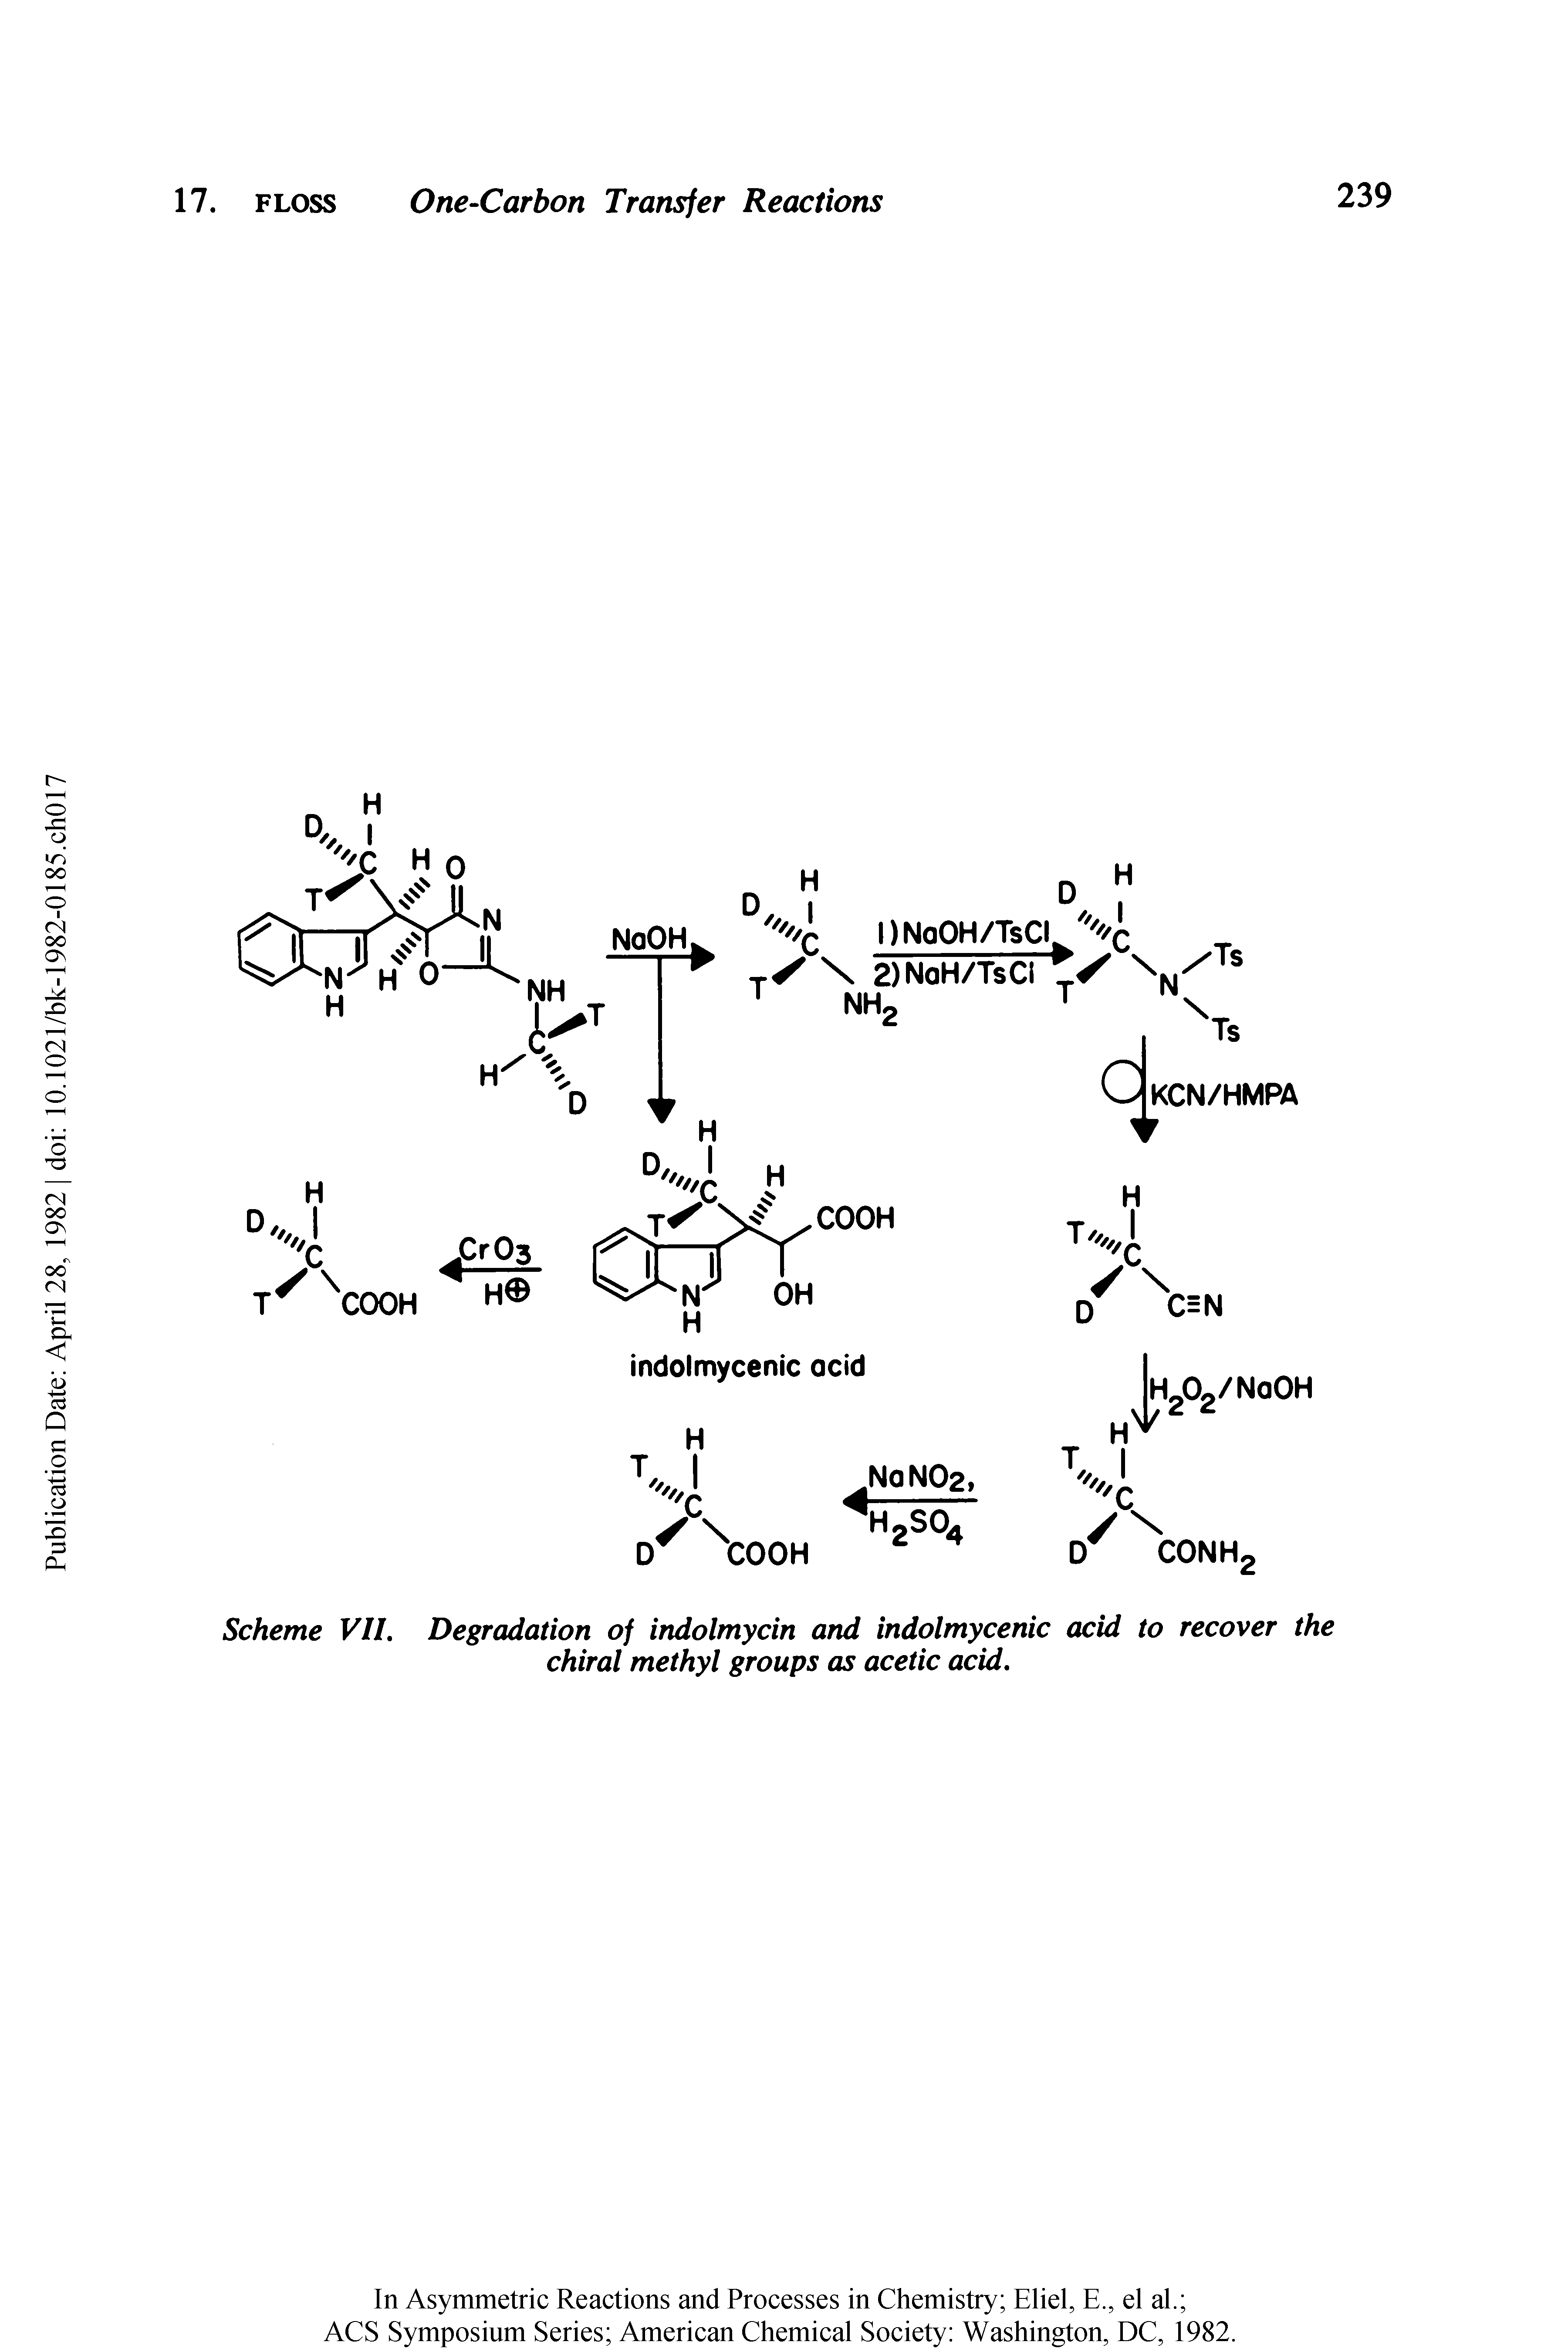 Scheme VII. Degradation of indolmycin and indolmycenic acid to recover the chiral methyl groups as acetic acid.